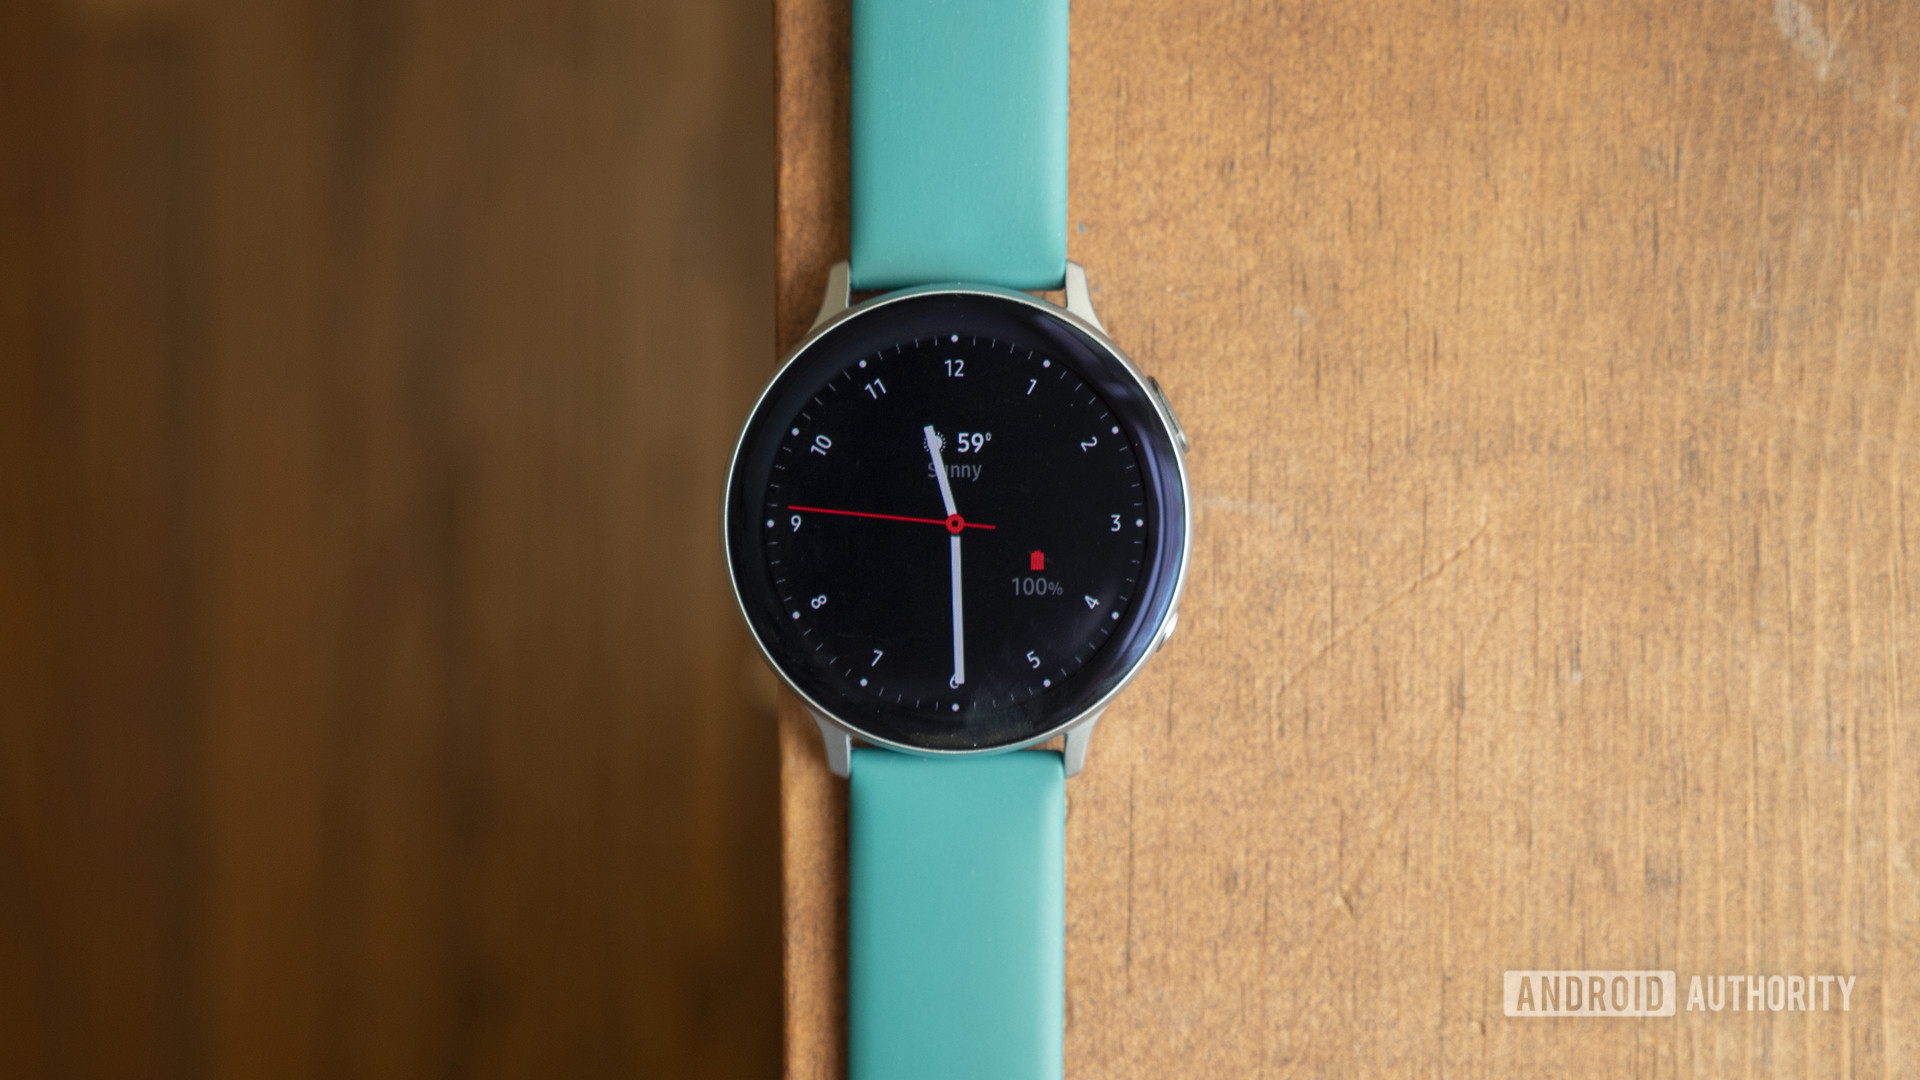 A samsung galaxy watch active 2 rests on a wooden surface displaying watch face.